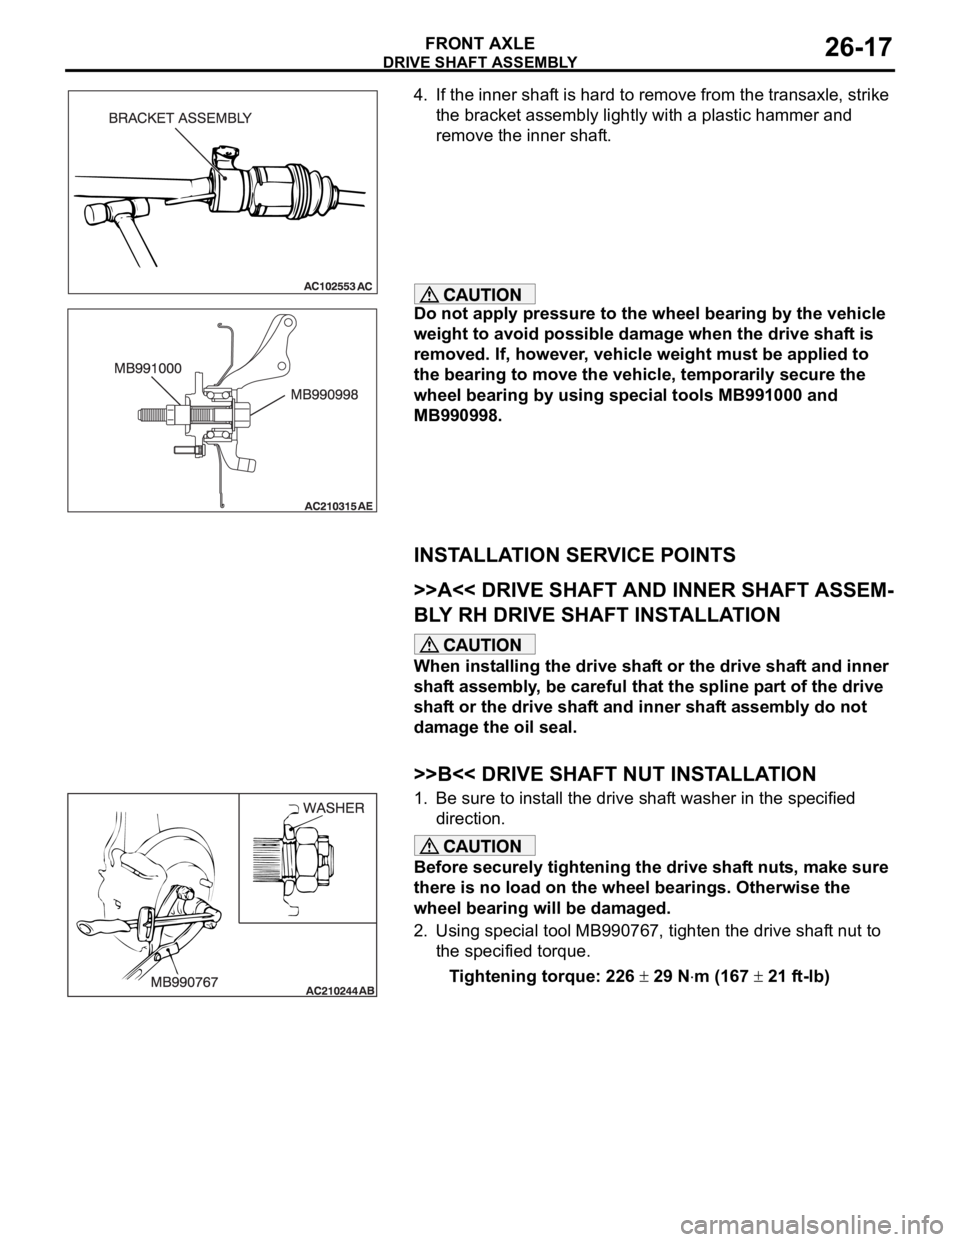 MITSUBISHI 380 2005  Workshop Manual DRIVE SHAFT ASSEMBLY
FRONT AXLE26-17
4. If the inner shaft is hard to remove from the transaxle, strike 
the bracket assembly lightly with a plastic hammer and 
remove the inner shaft. 
Do not apply p